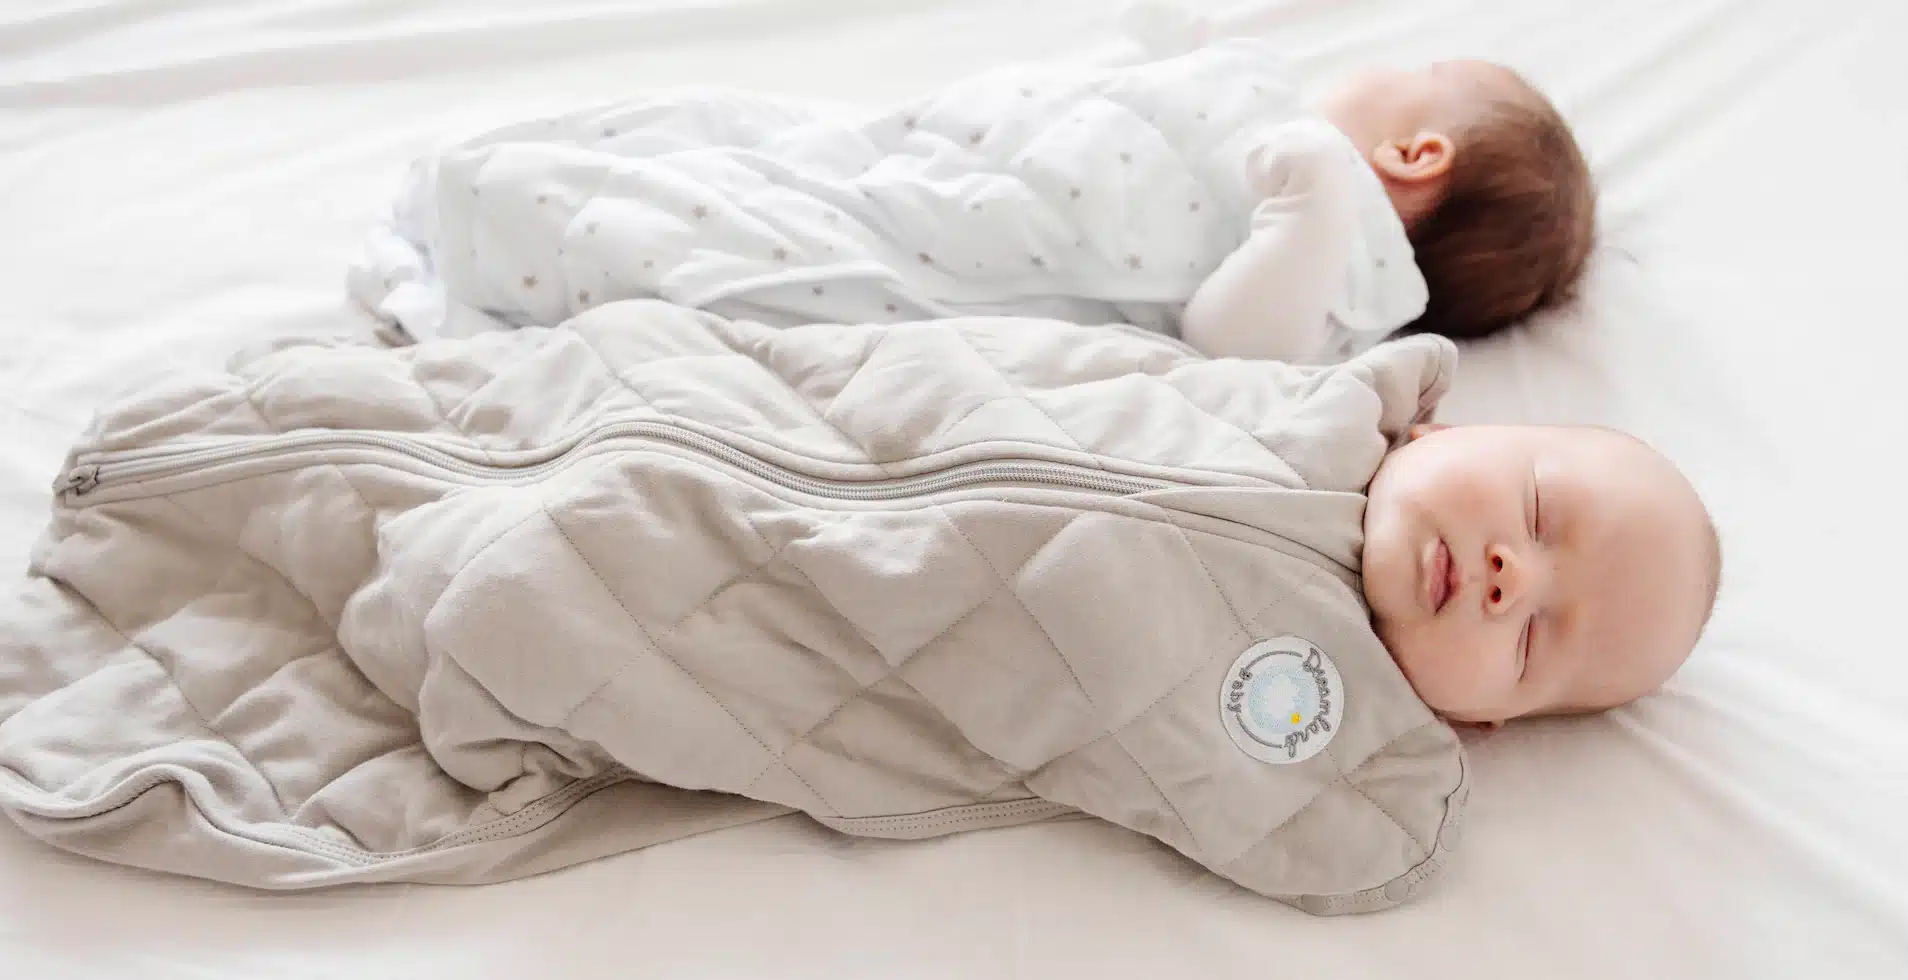 Two peacefully sleeping babies in their cozy sleeping bags, highlighting the importance of sleep for young children